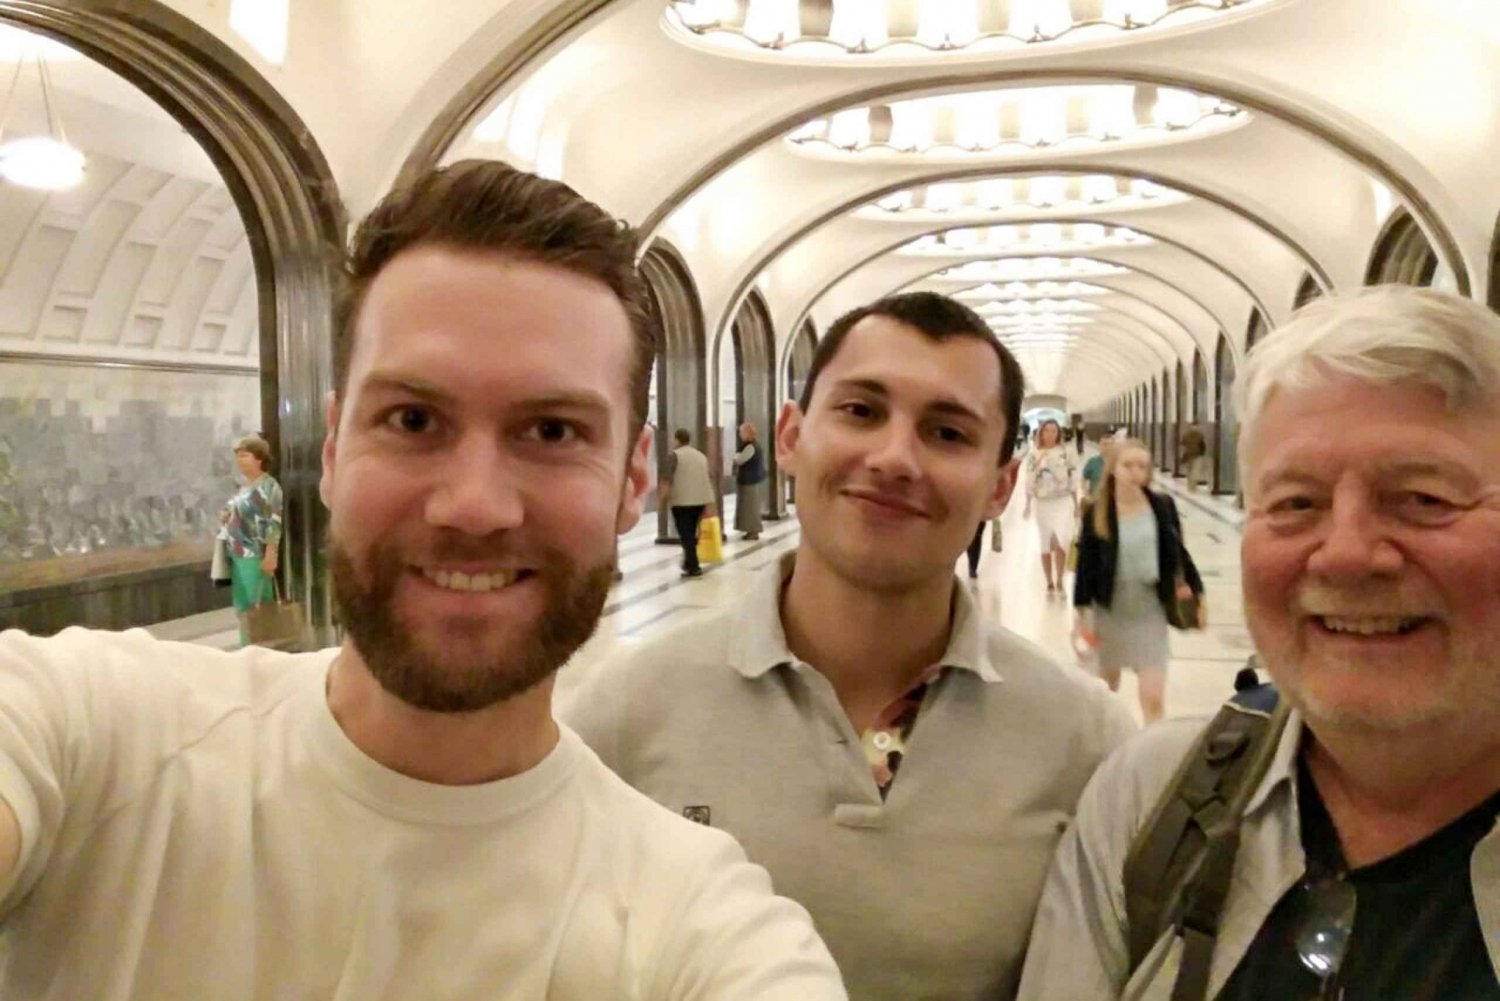 Moscow: Private Metro Tour with Hotel Pickup